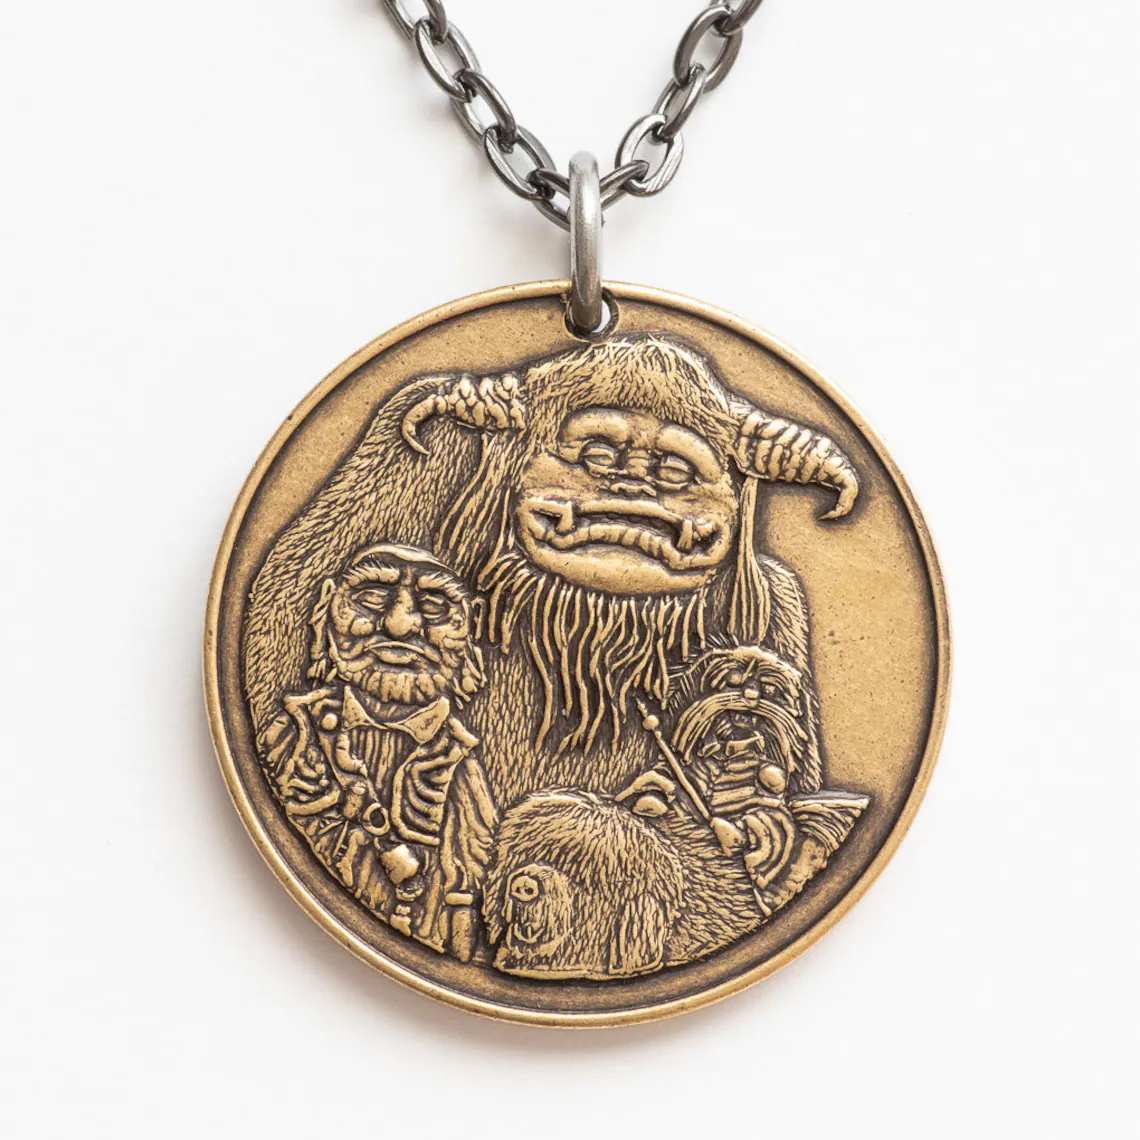 Labyrinth Should You Need Us Necklace Charm